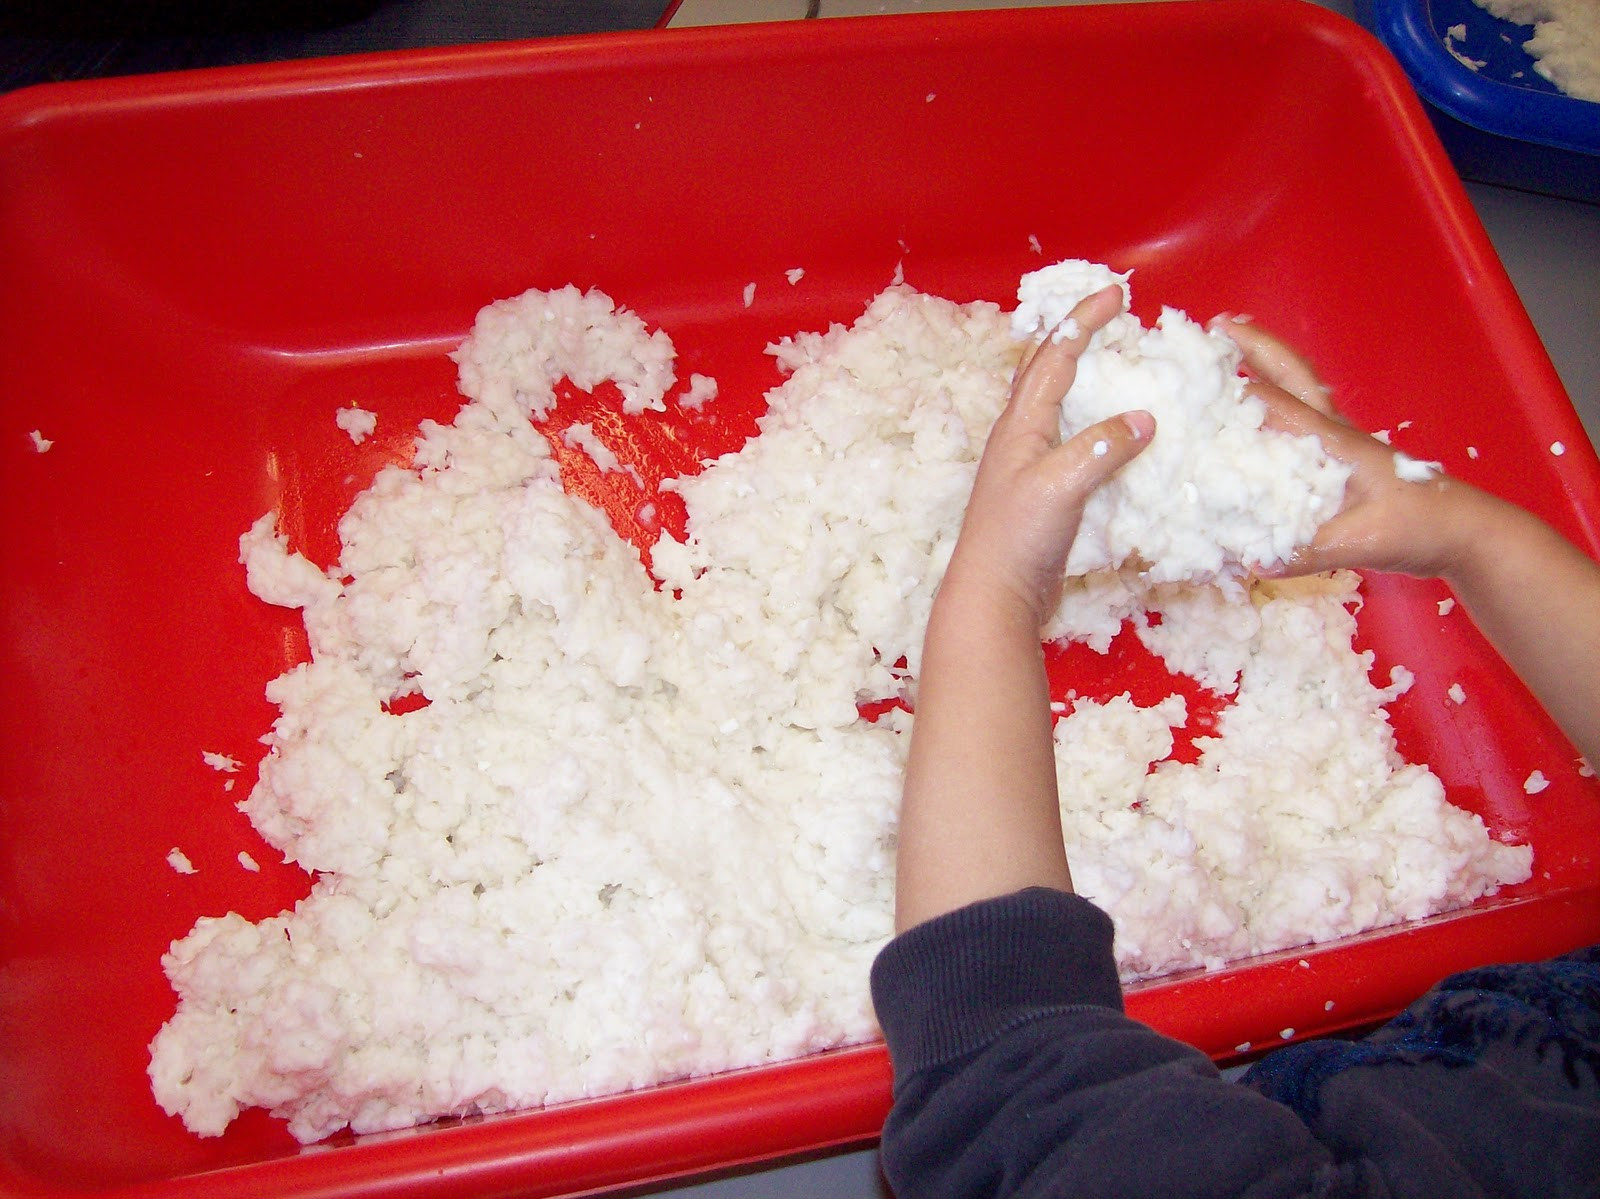 Winter Sensory Table Ideas
 Learning and Teaching With Preschoolers Winter Sensory Table